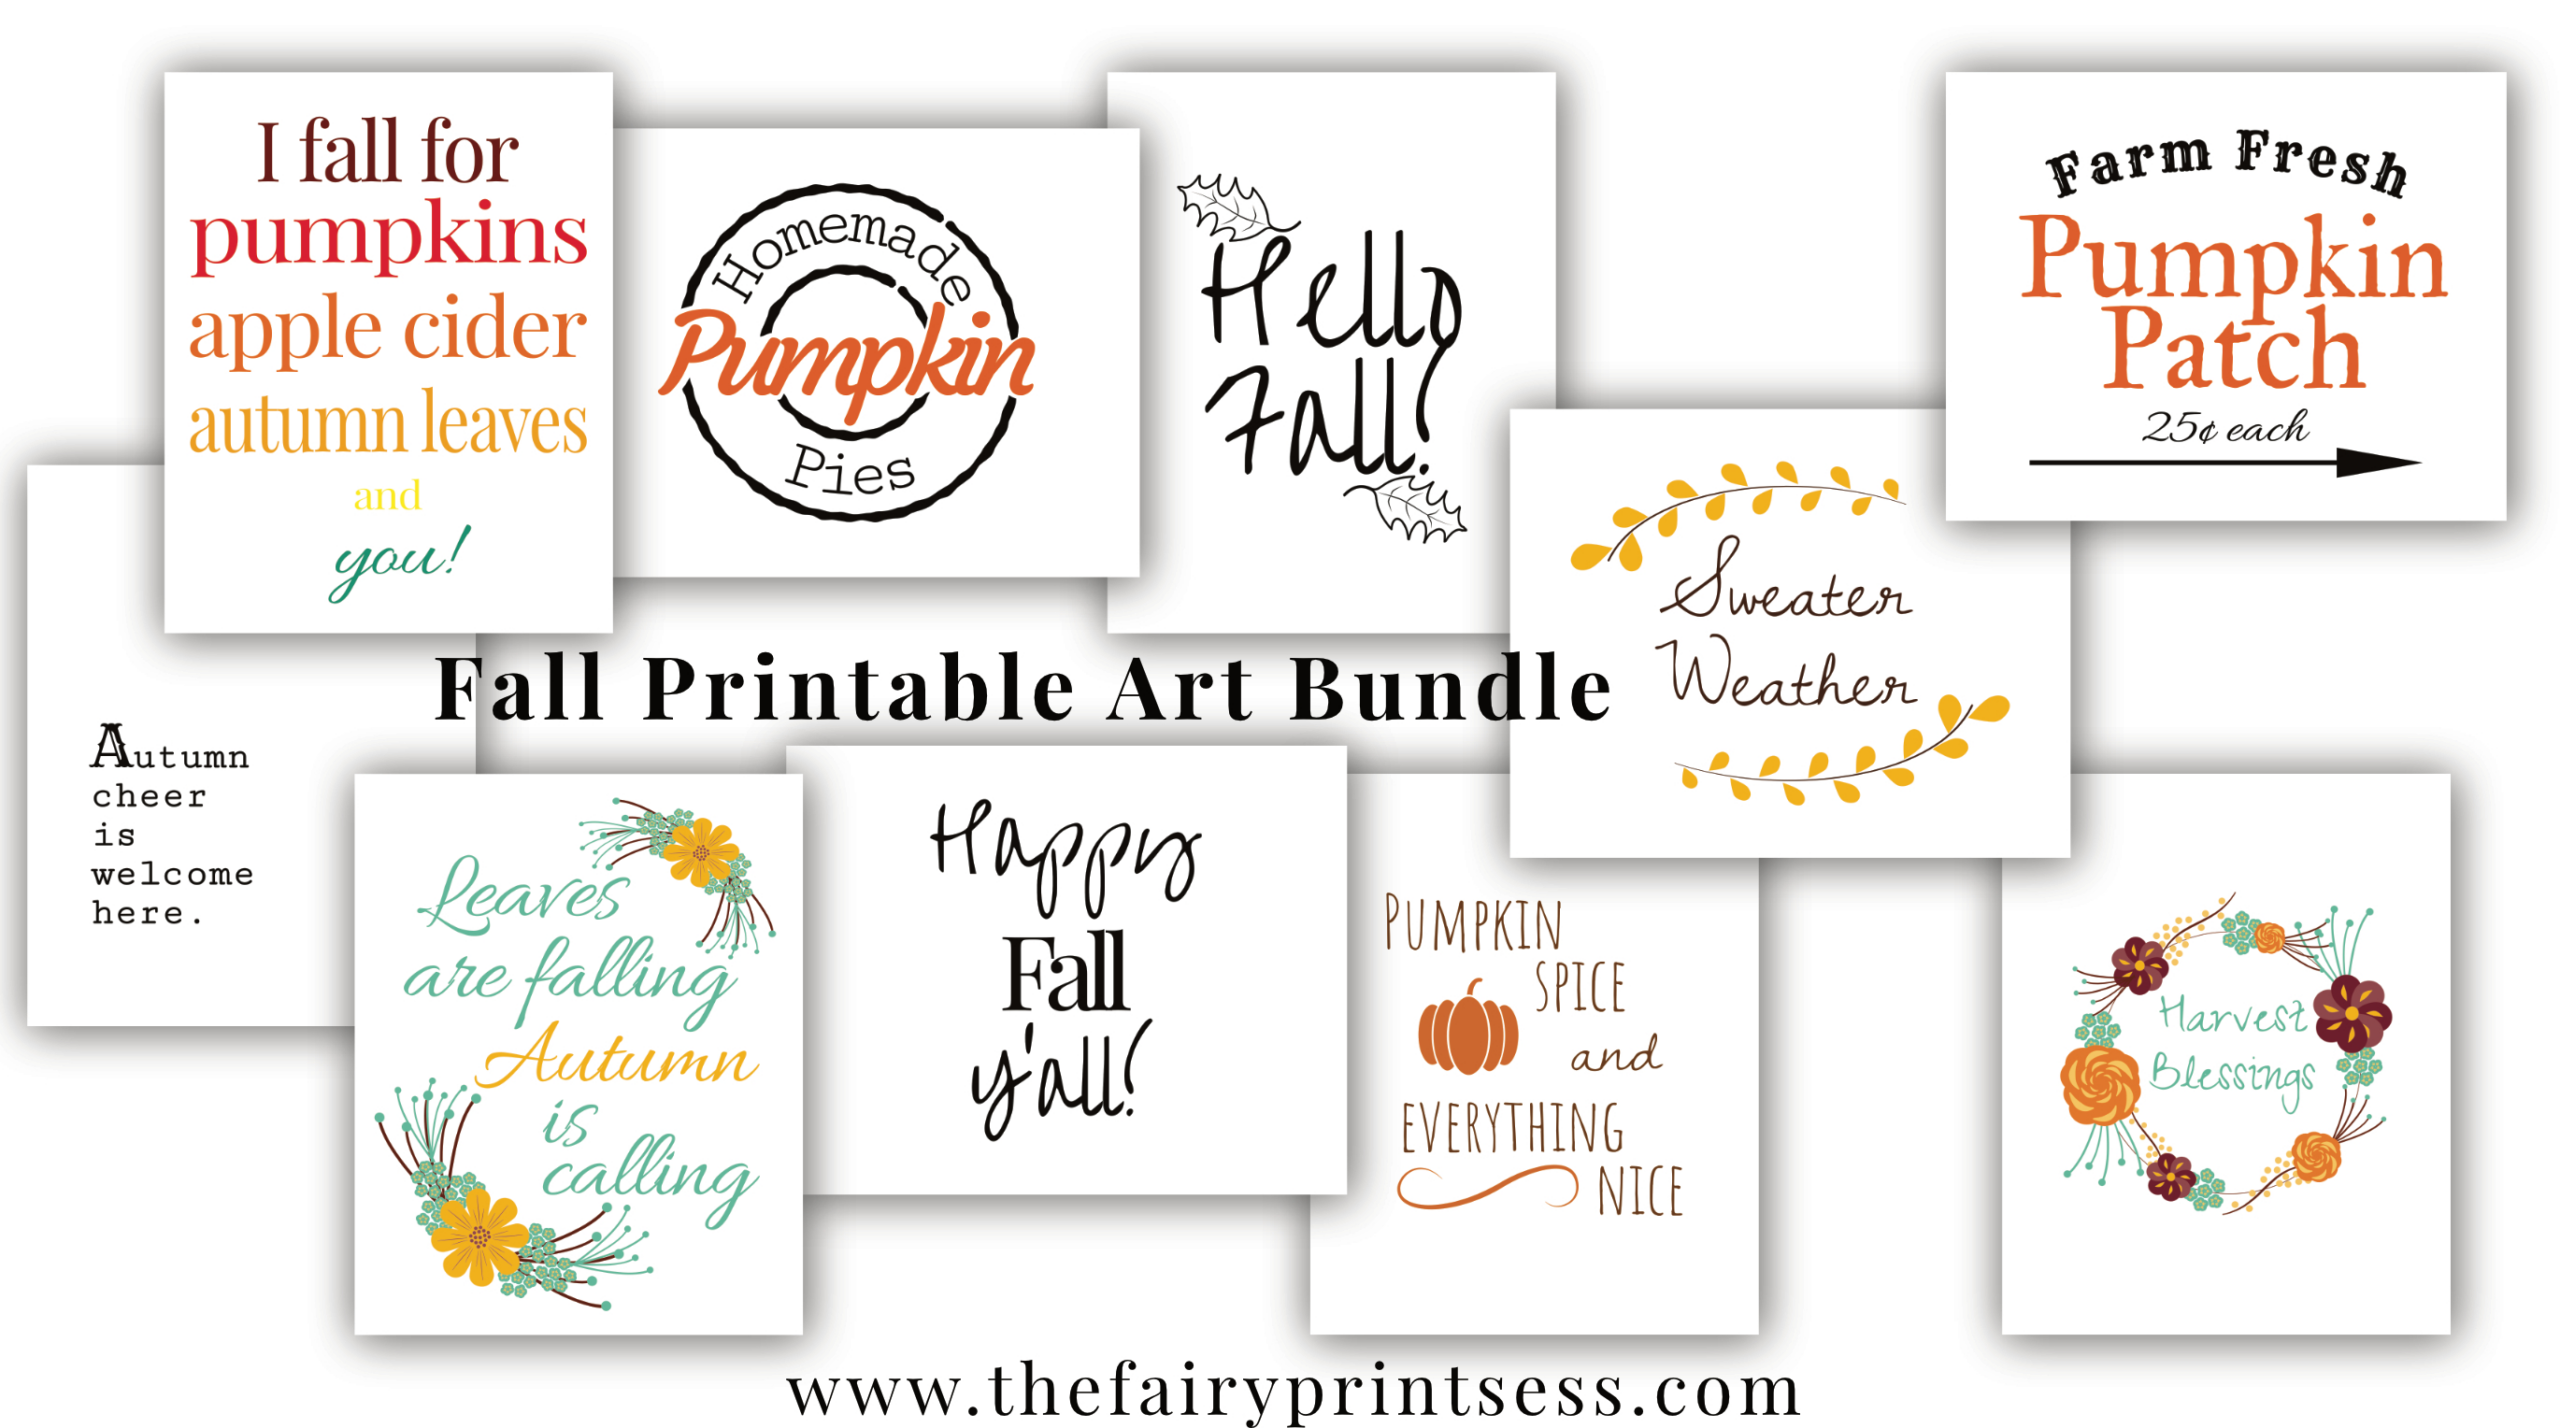 Fall Printable Art Bundle - 10 Free Art Prints For Decor And More! pertaining to Free October Printables